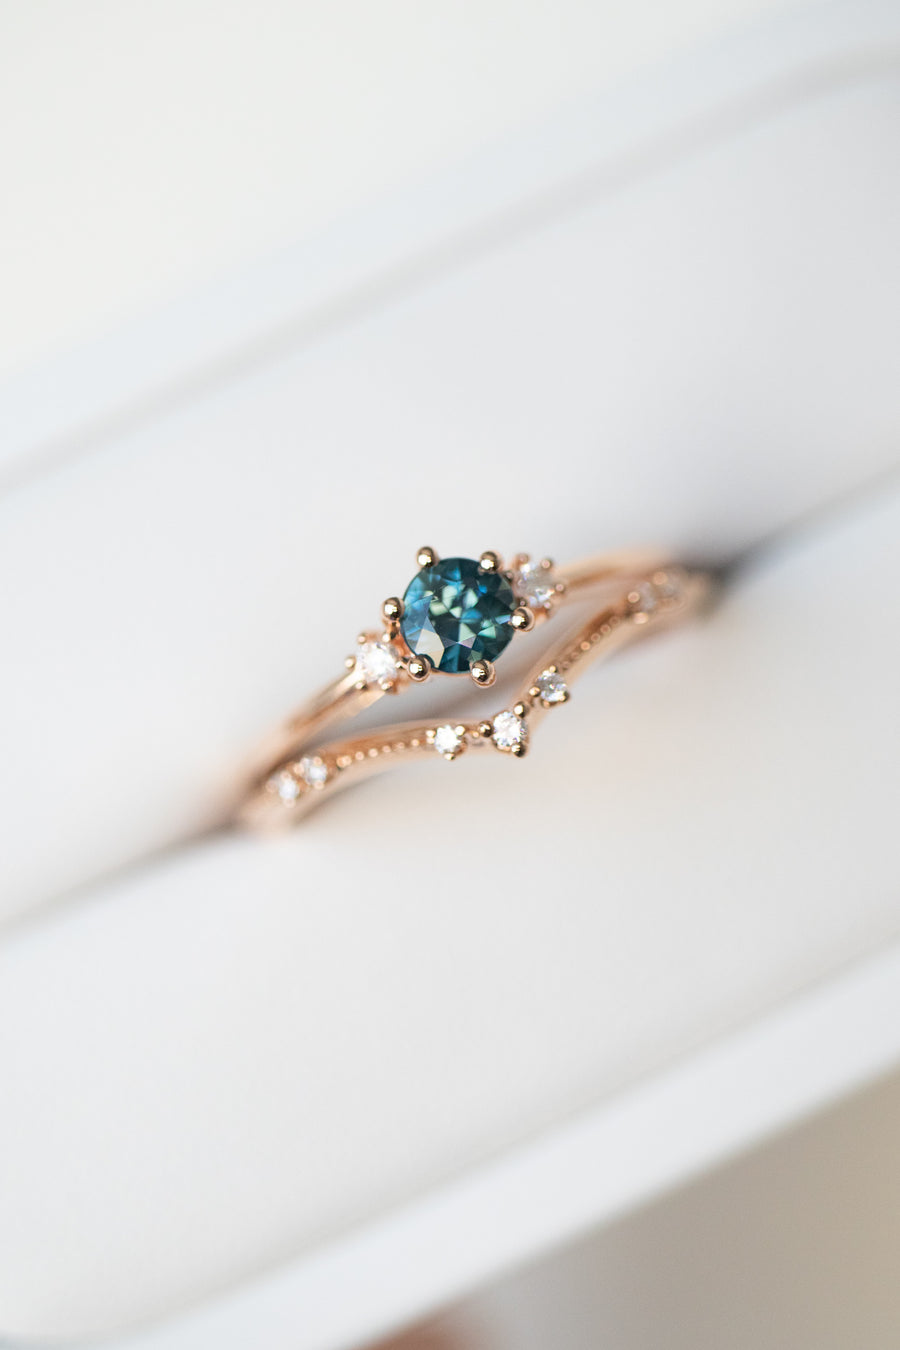 LIMITED DISCOUNT (3 SETS ONLY) ~0.30carat Natural Teal Sapphire & total 0.04carat Diamond 18K with total 0.04carat Diamond Stacking Ring